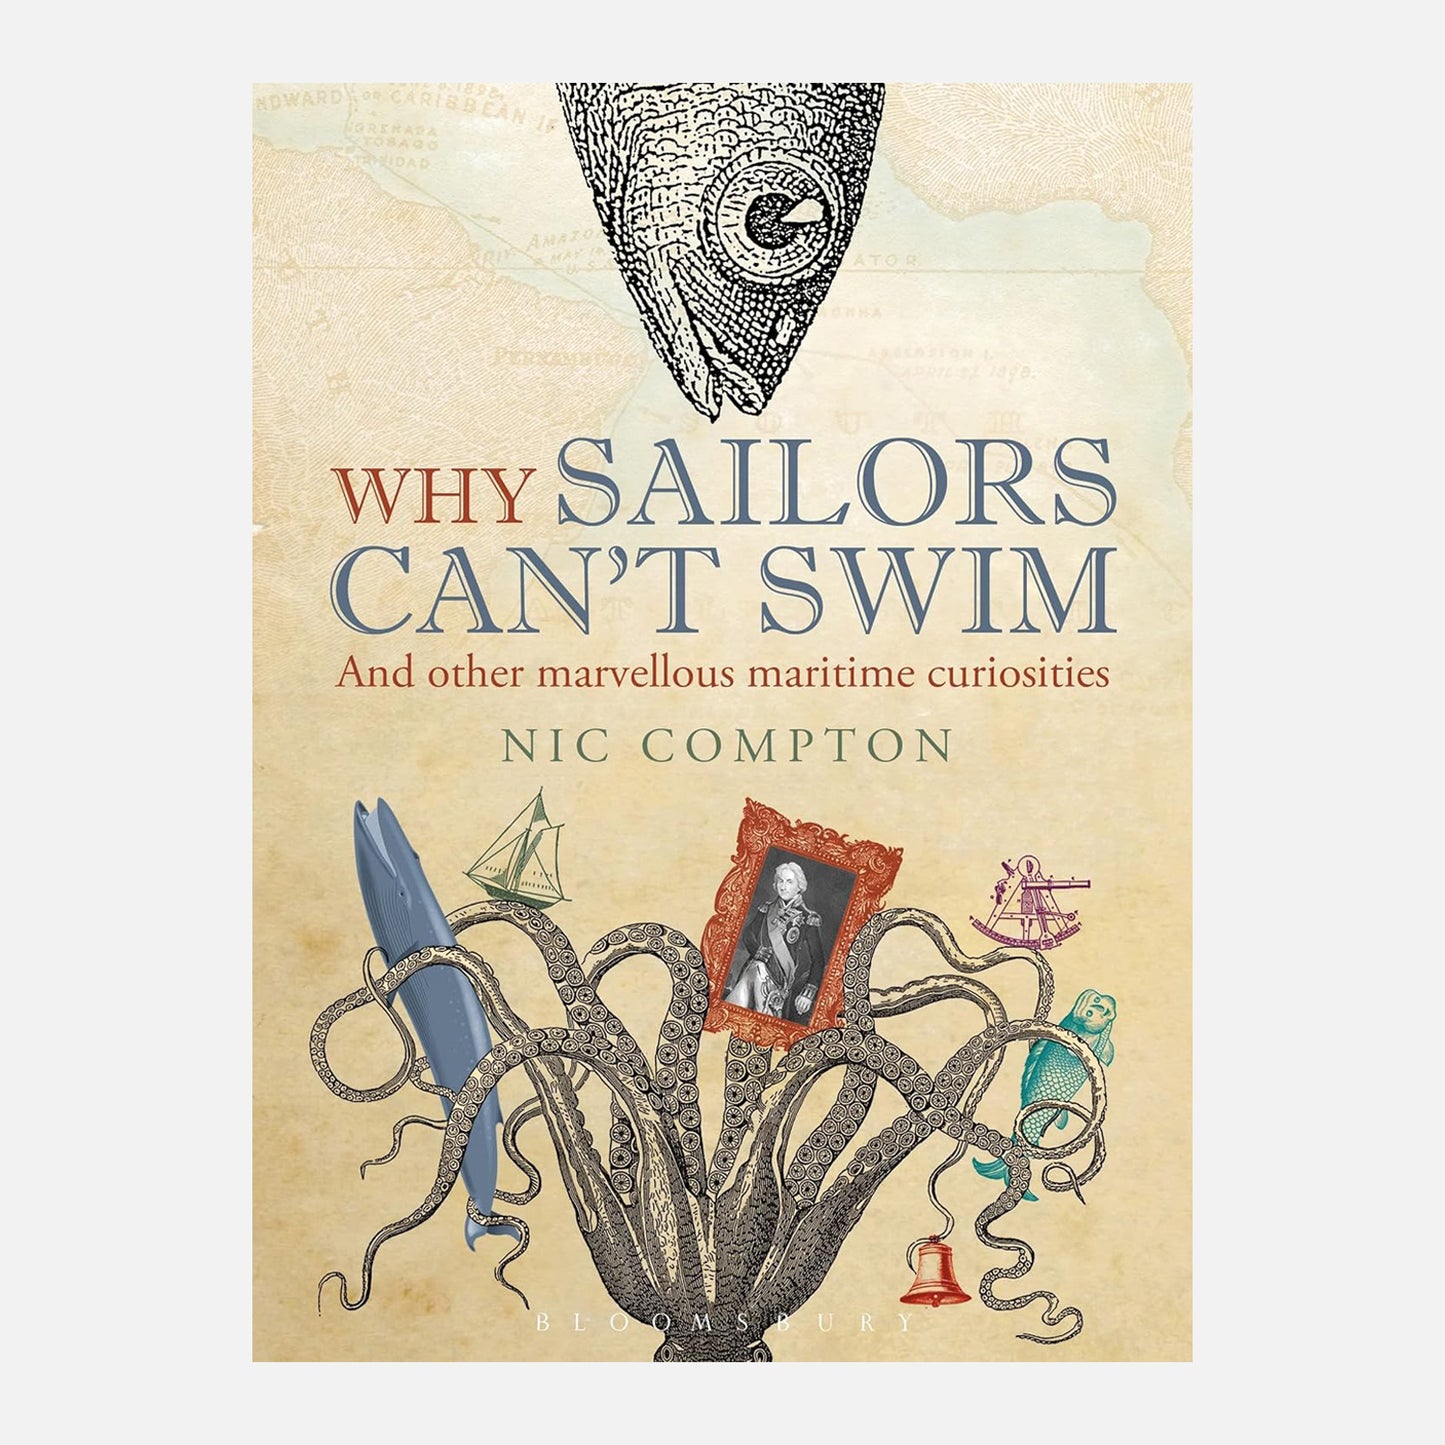 Why Sailors Cant Swim cover image with maritime objects